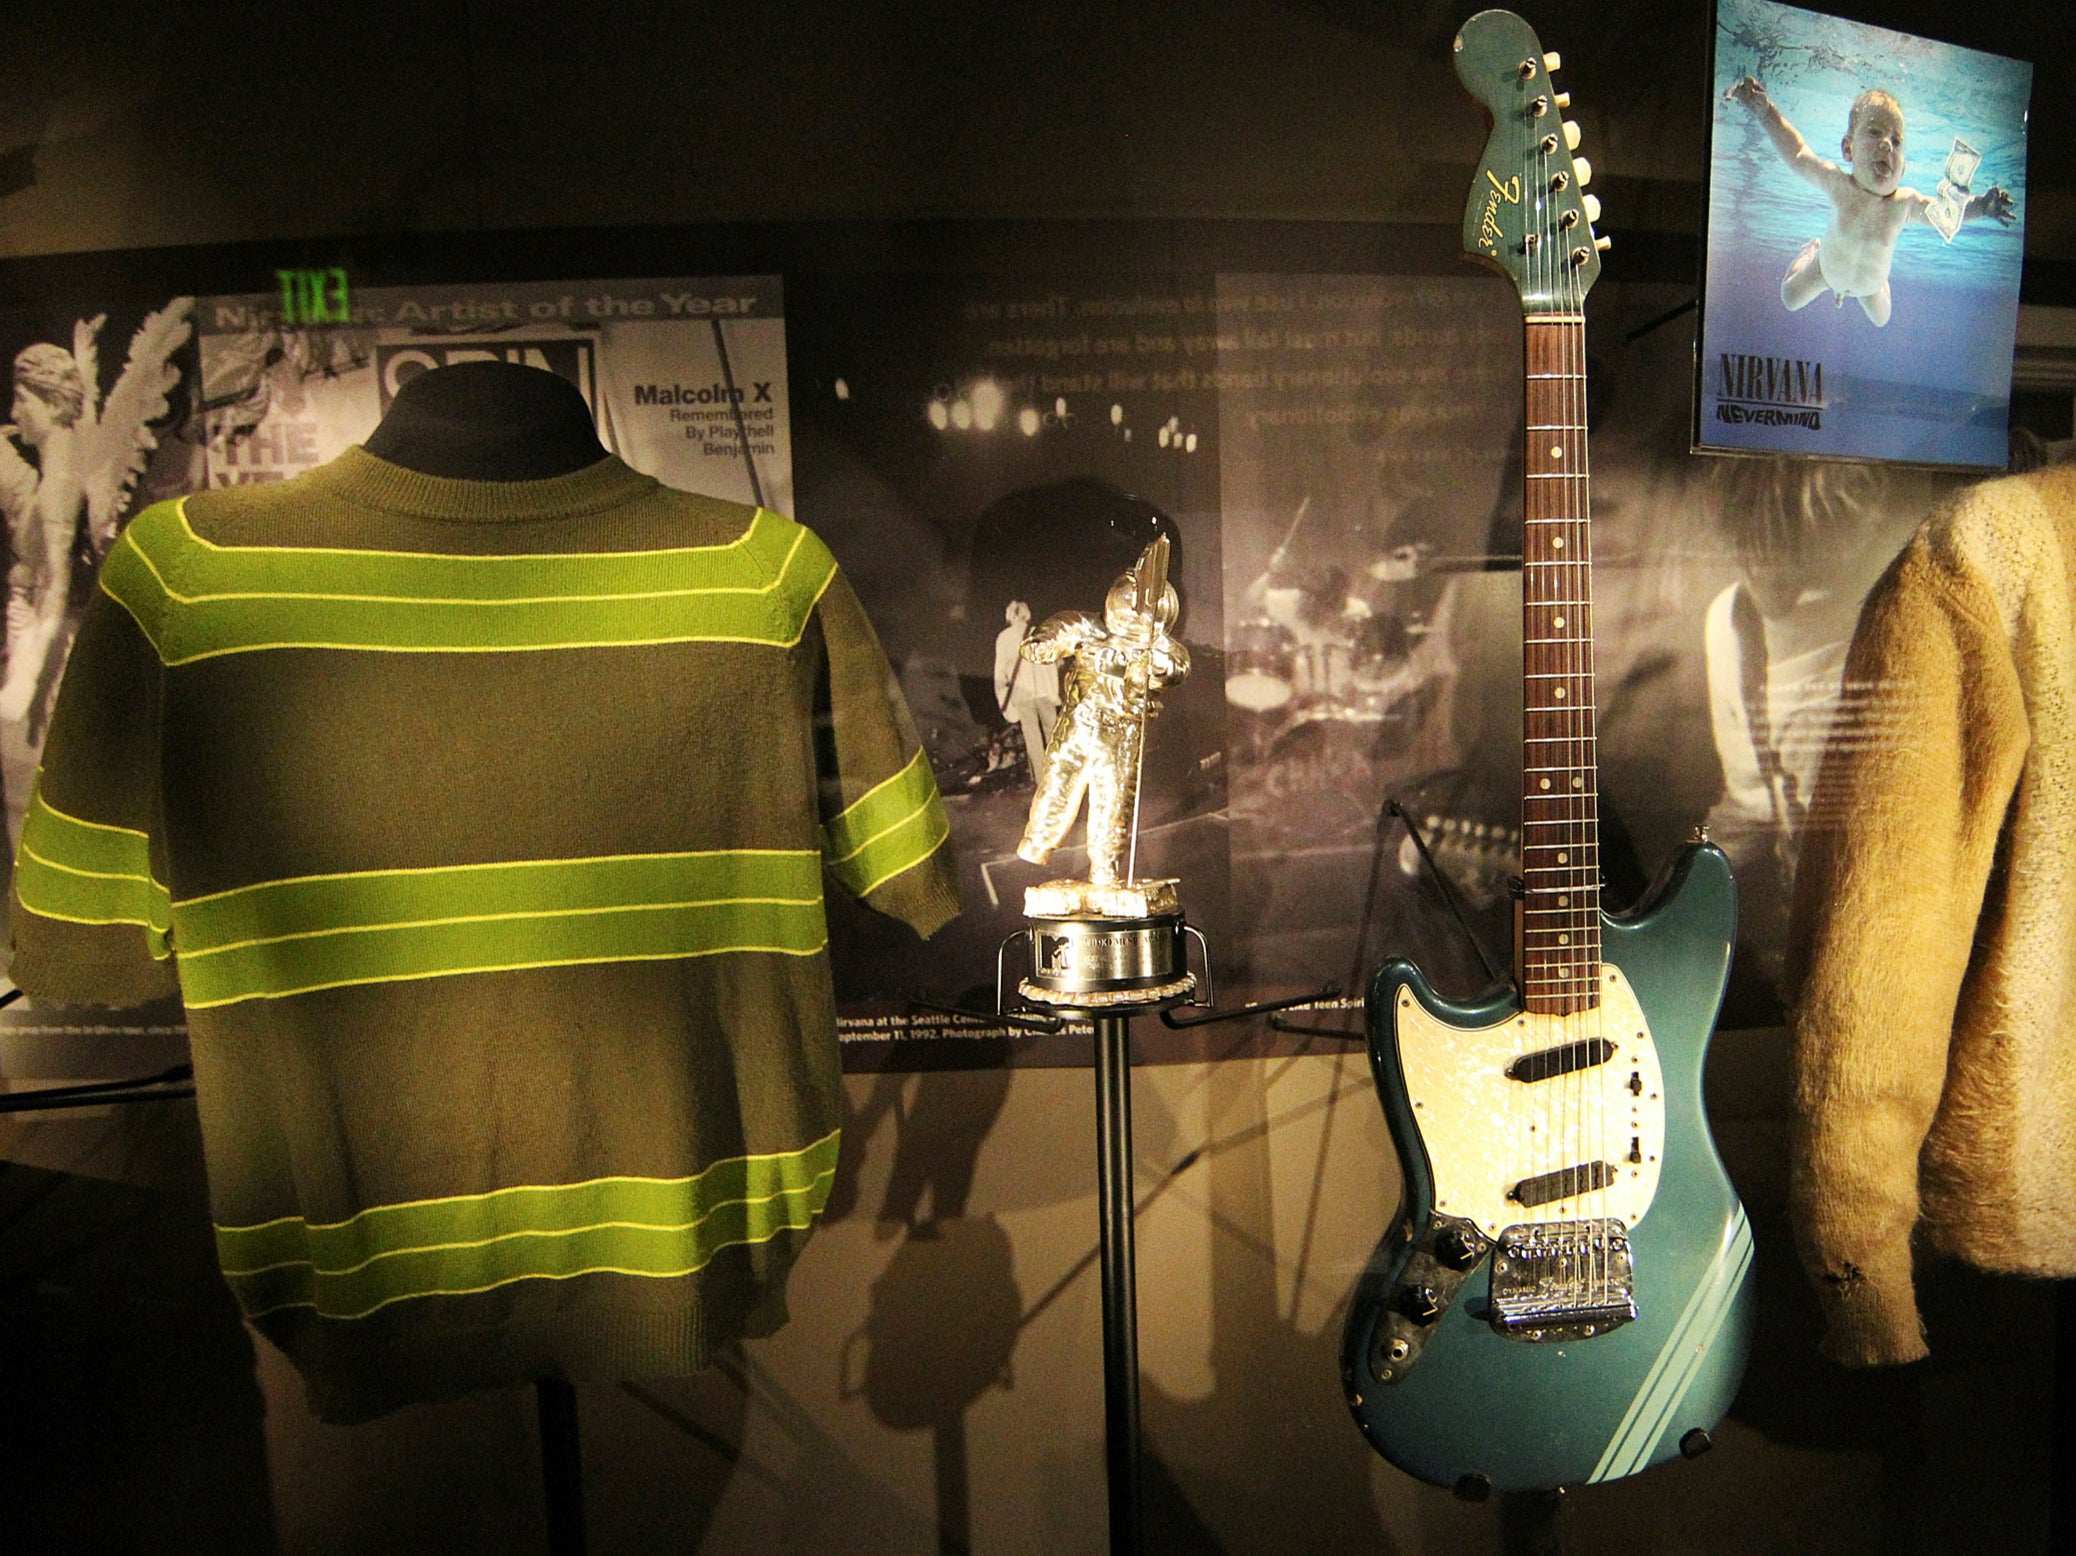 The guitar is one of the most iconic guitars ever to come to the auction block